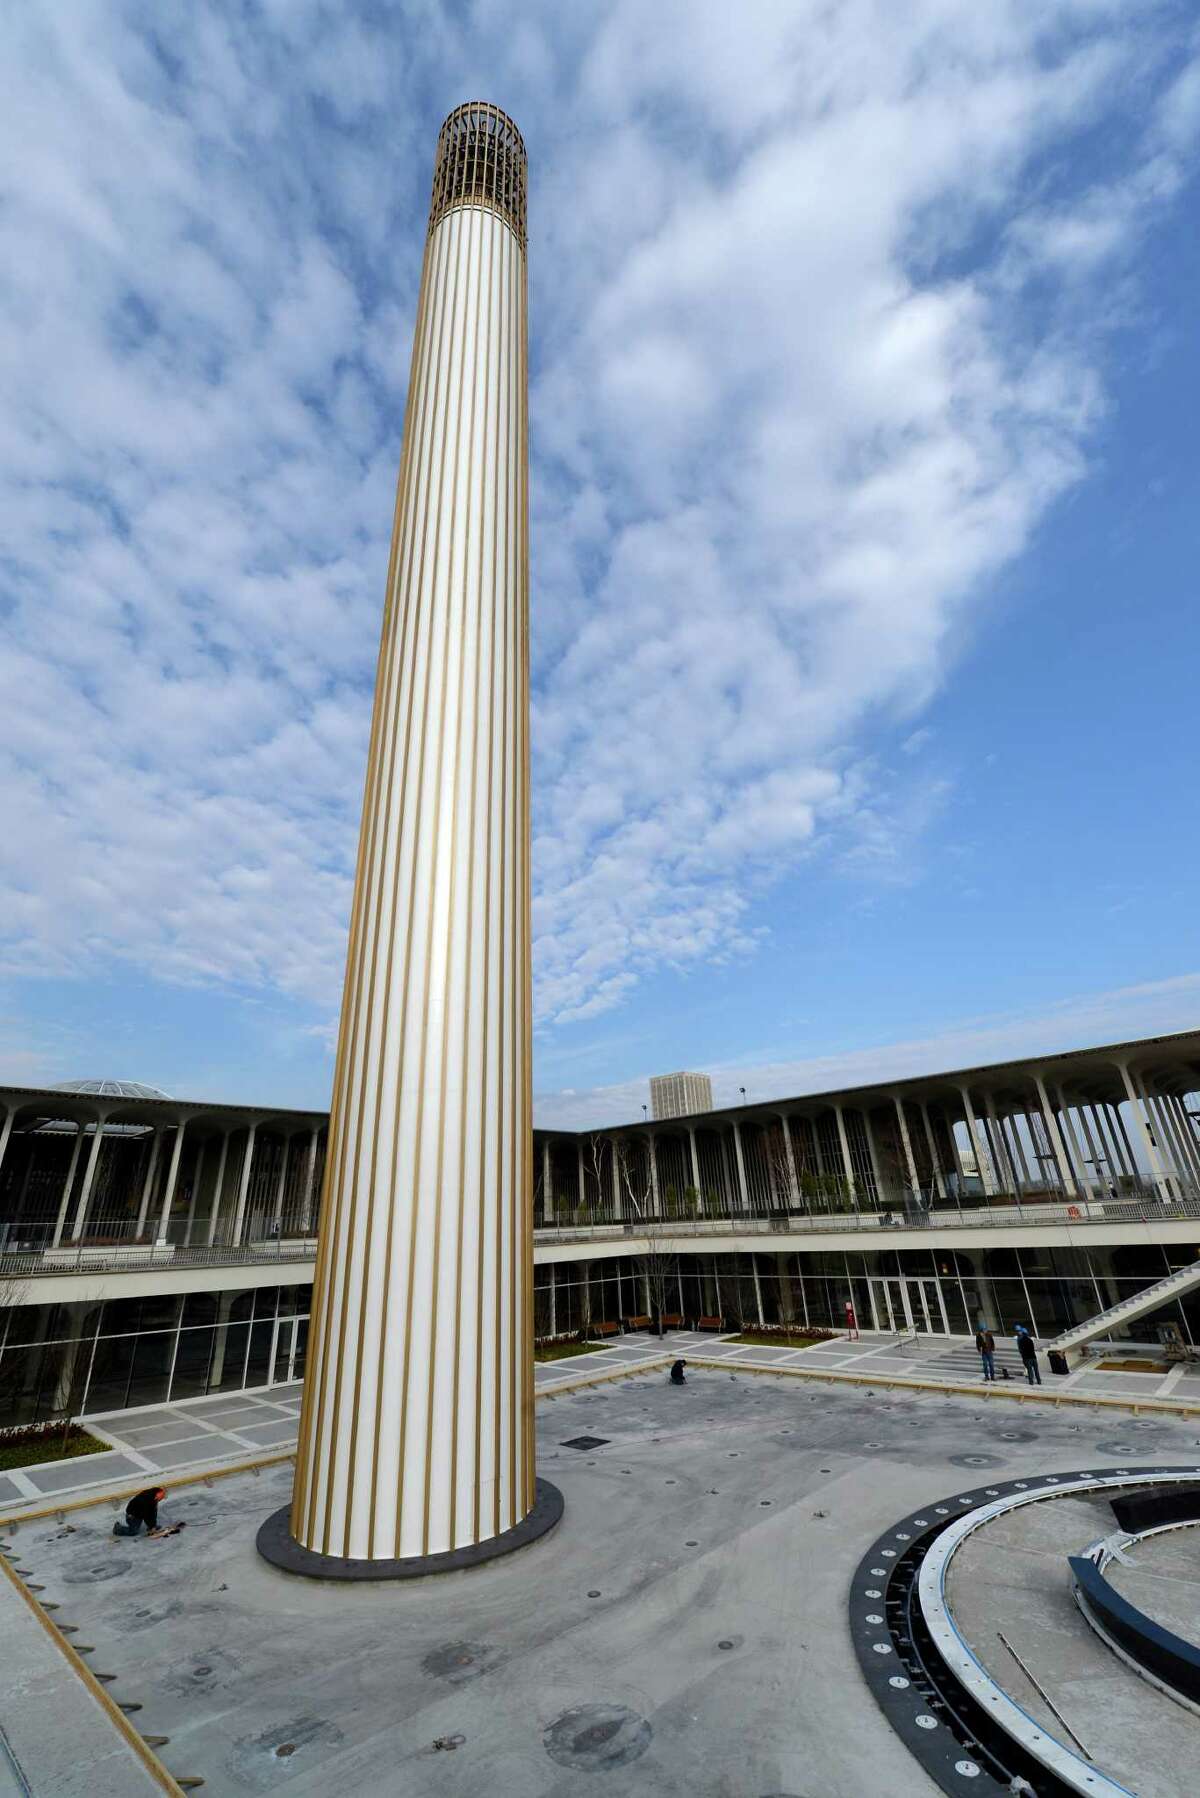 The iconic carillon at the University of Albany is pictured Wednesday, Dec. 4, 2013, in Albany, N.Y. The carillon was chosen as a finalist in the annual Tank of the Year calendar published by Tnemec Company, Inc., a leading provider of high-performance coatings. (Skip Dickstein/Times Union)